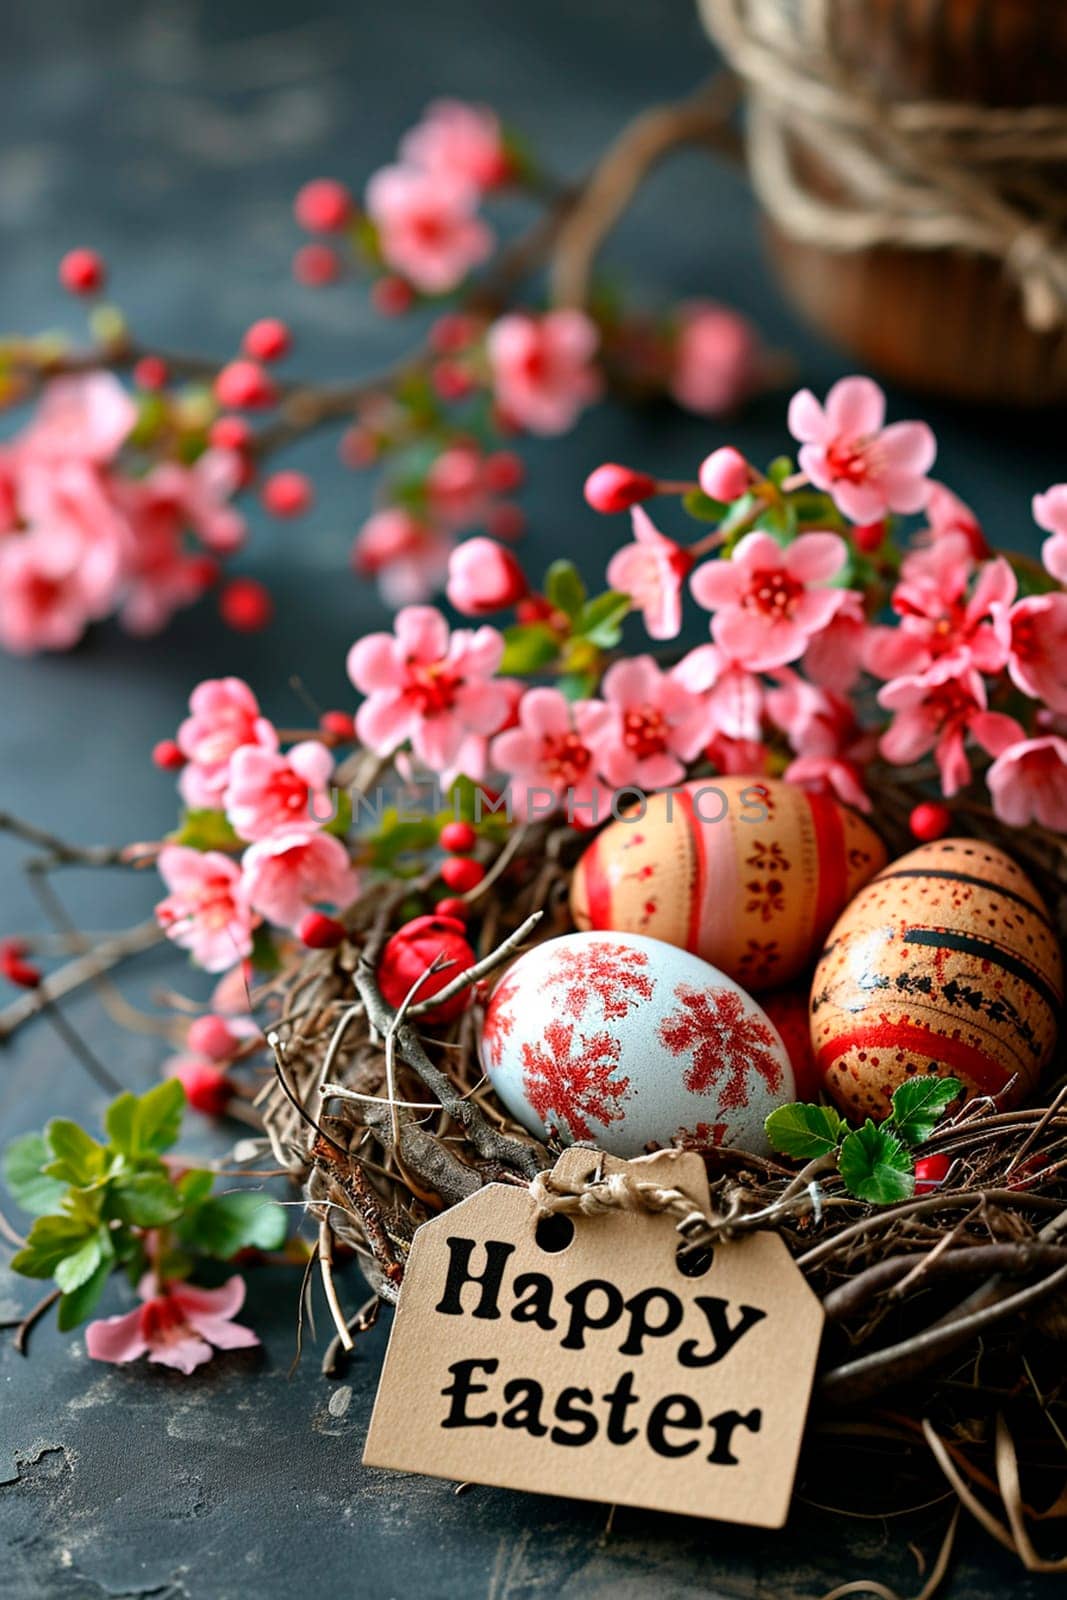 Happy Easter card and eggs. Selective focus. by yanadjana